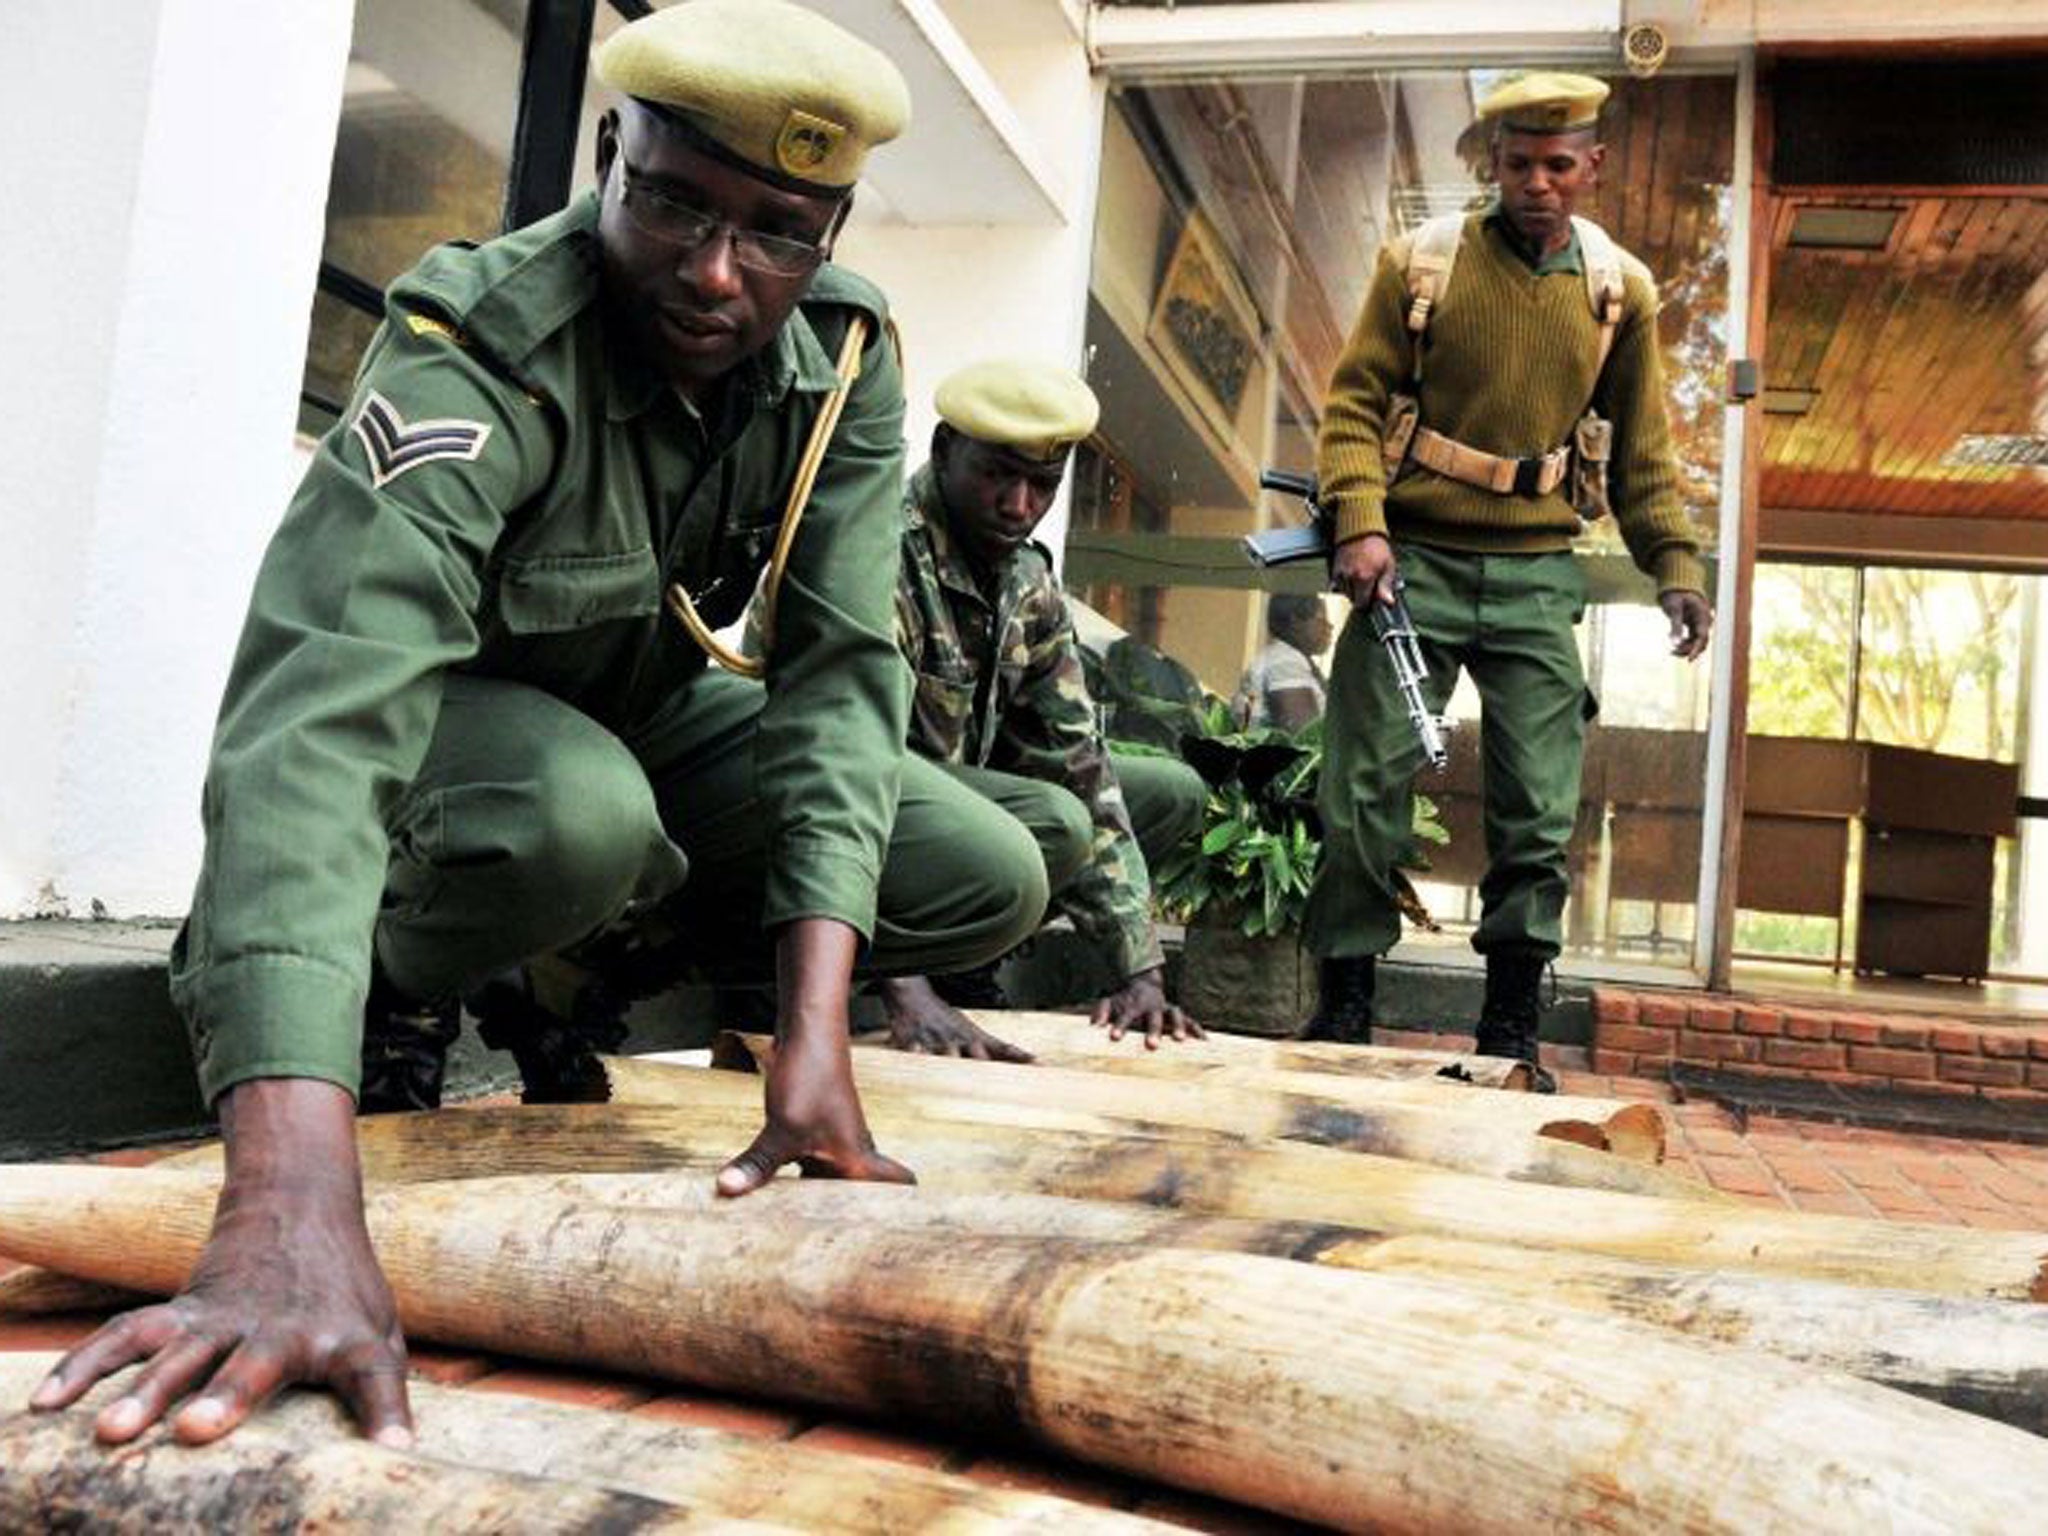 Smuggled goods: Kenya Wildlife Service rangers with confiscated ivory found in a truck’s secret compartment earlier this year